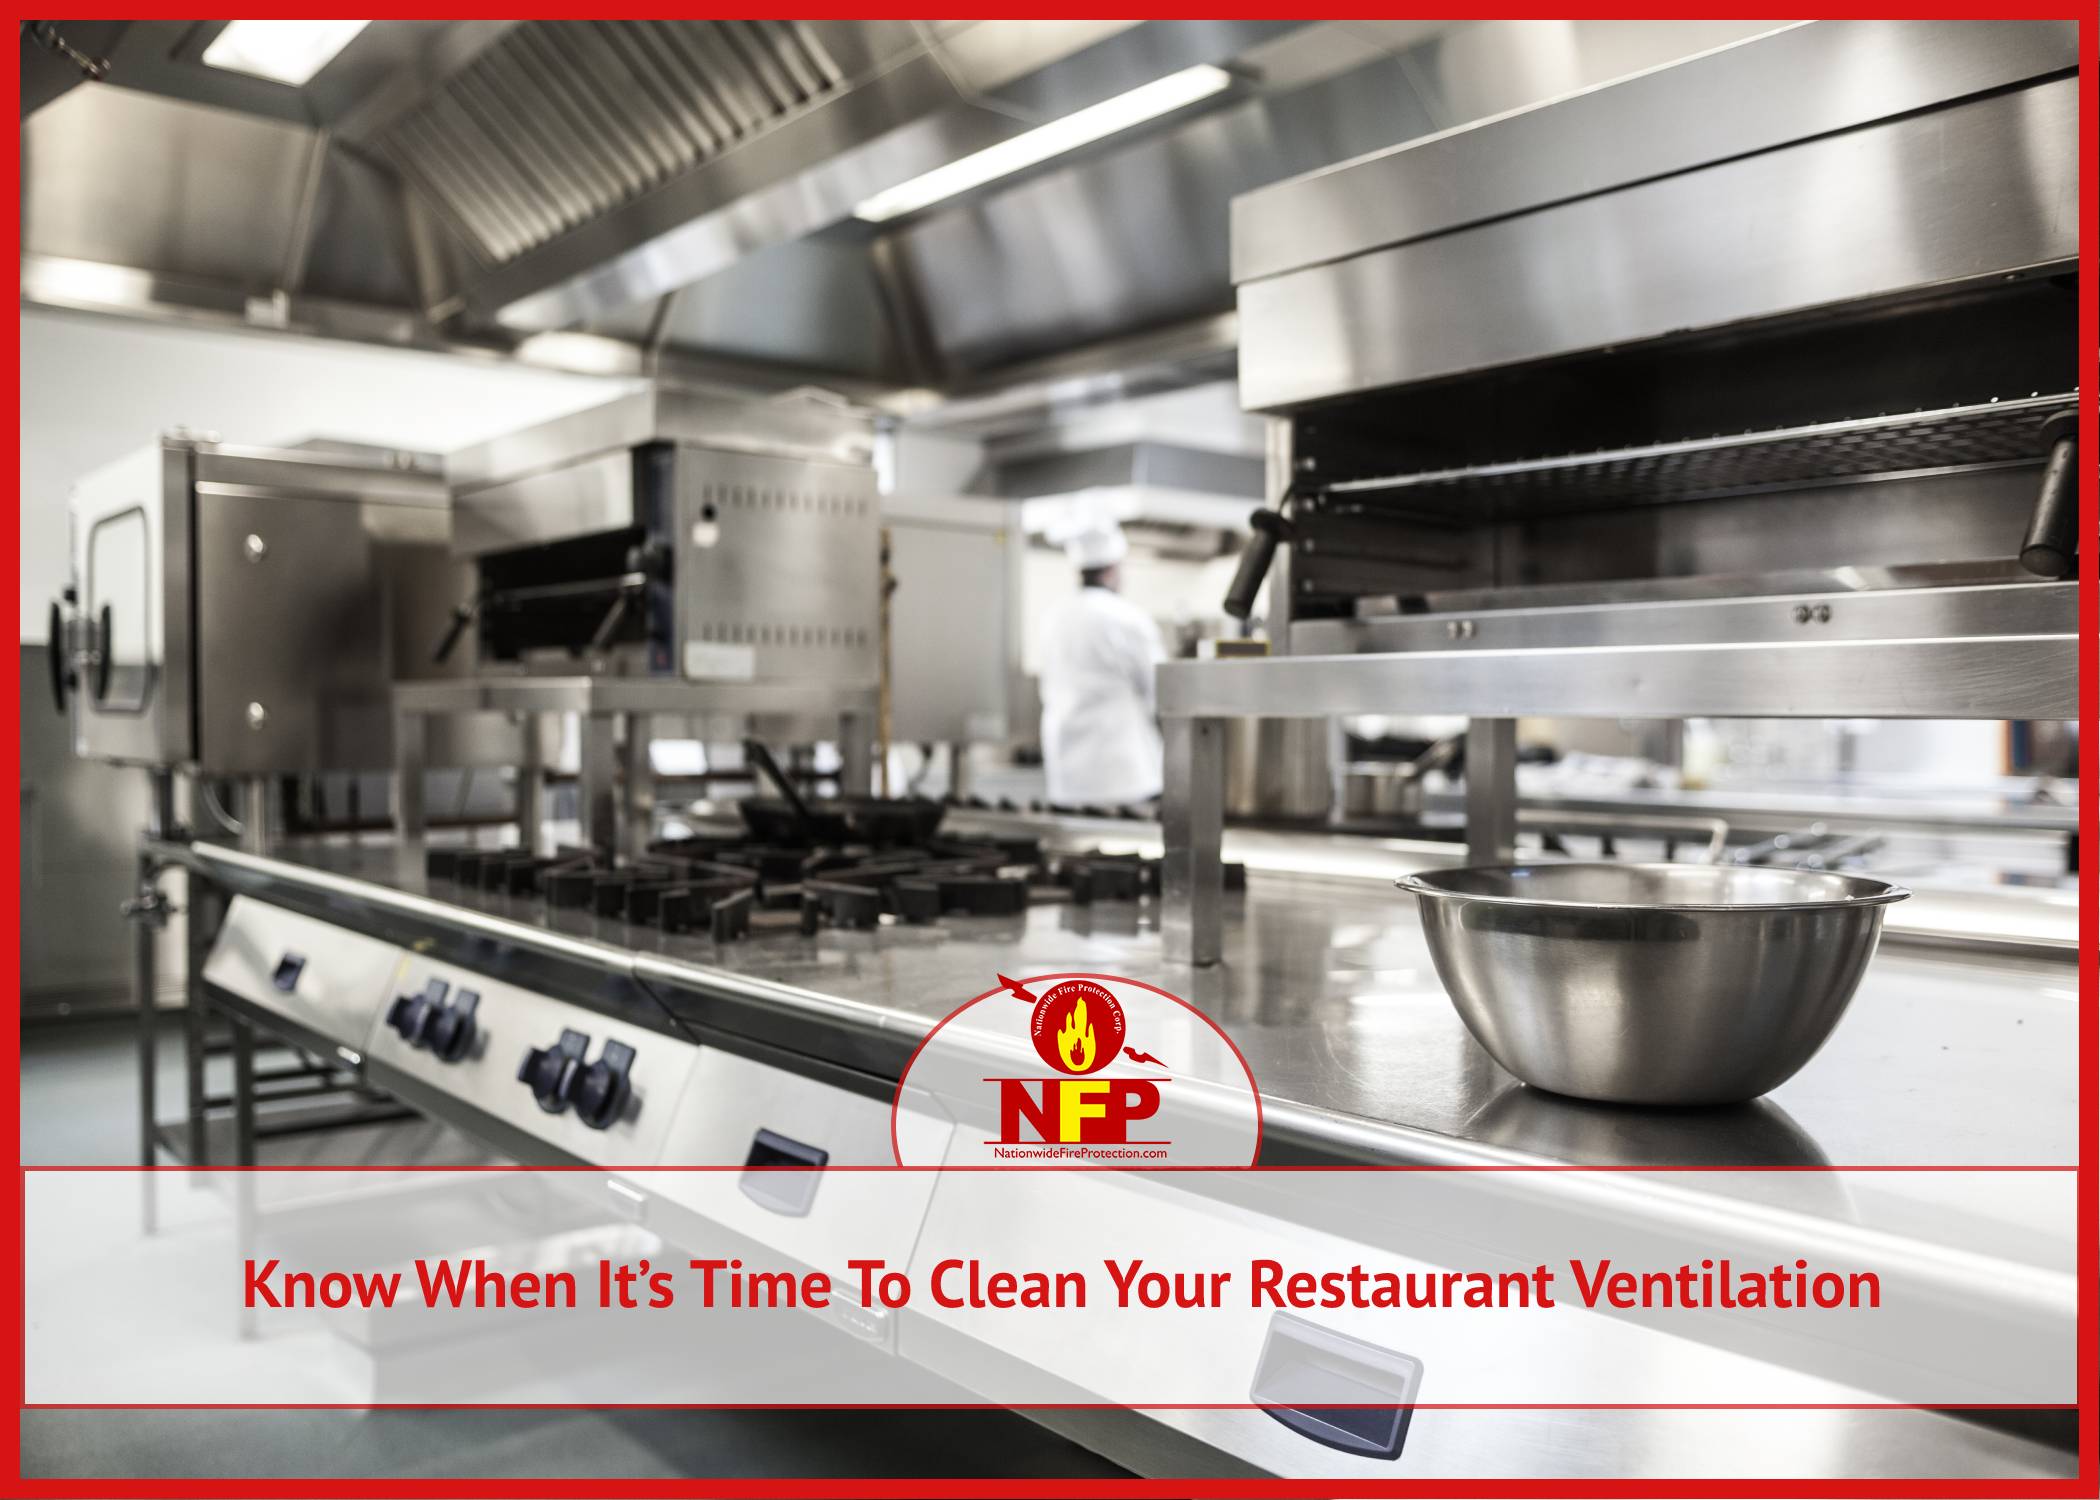 Know When It’s Time To Clean Your Restaurant Ventilation